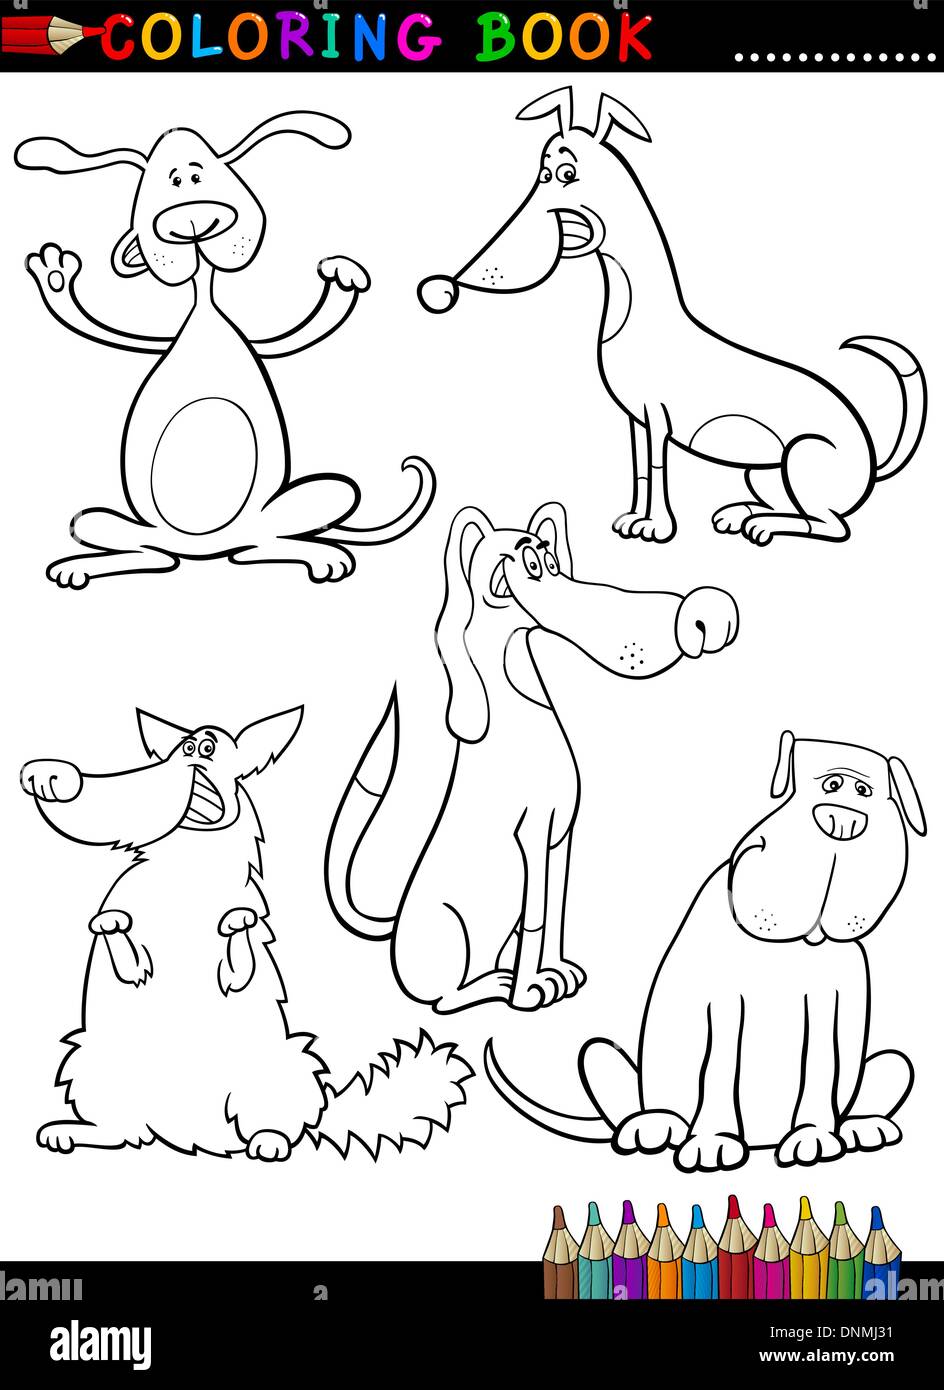 Coloring Book or Coloring Page Black and White Cartoon Illustration of Funny Purebred or Mongrel Dogs Stock Vector